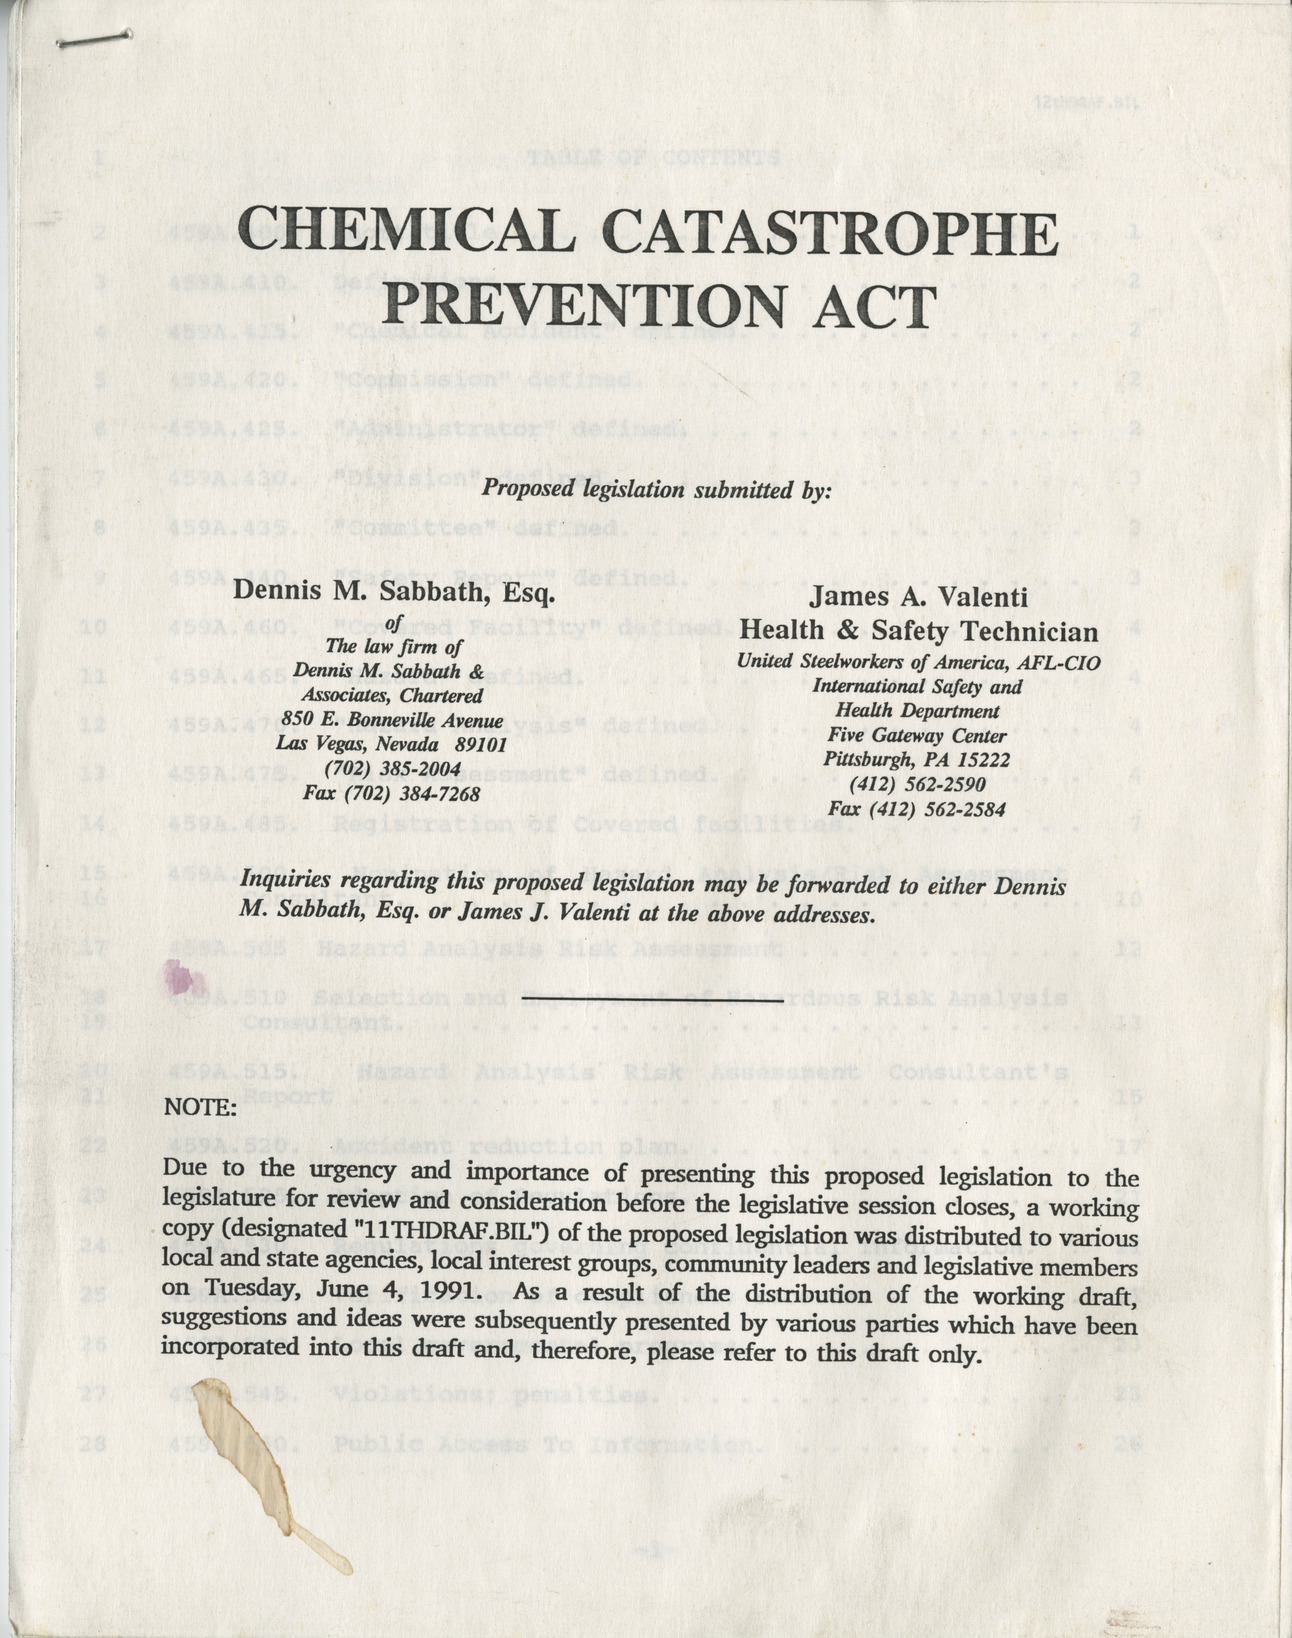 Cover page for proposed legislation for the Chemical Catastrophe Prevention Act, submitted by Dennis M. Sabbath, Esq. and James A. Valentini (Health and Safety Technician), June 4, 1991